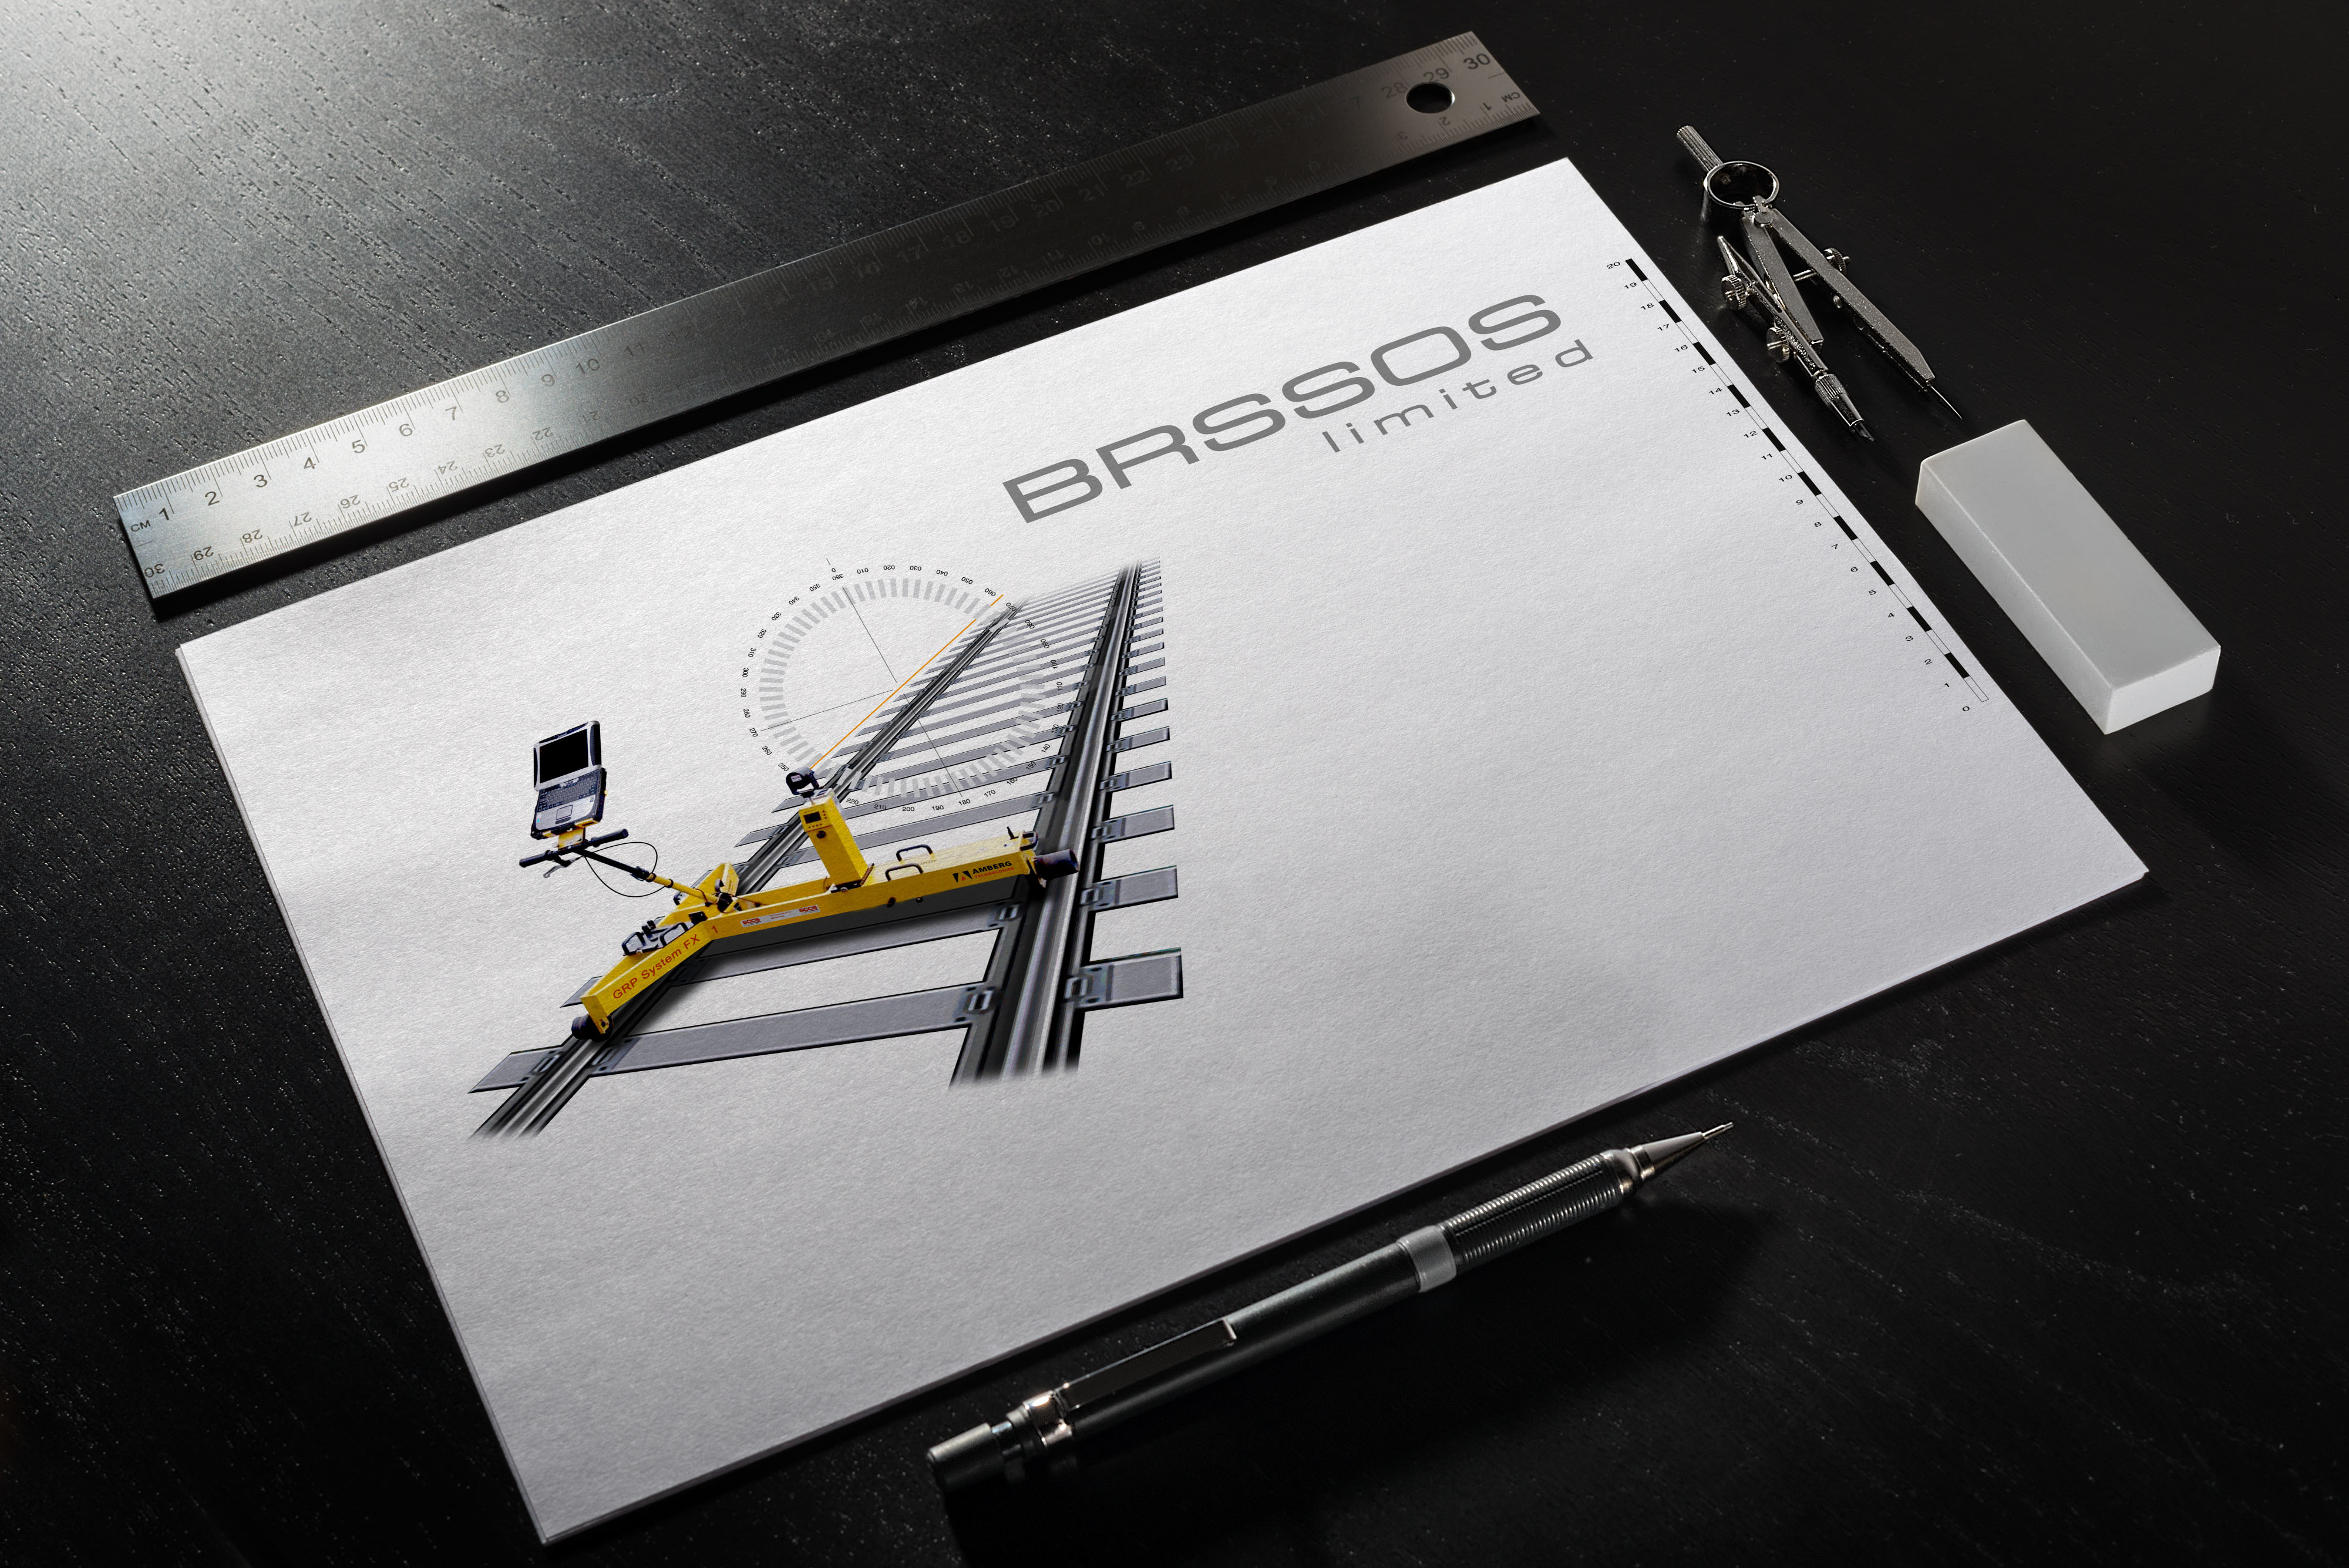 An image showing the final logo design for BROSSOS on a sketchpad.